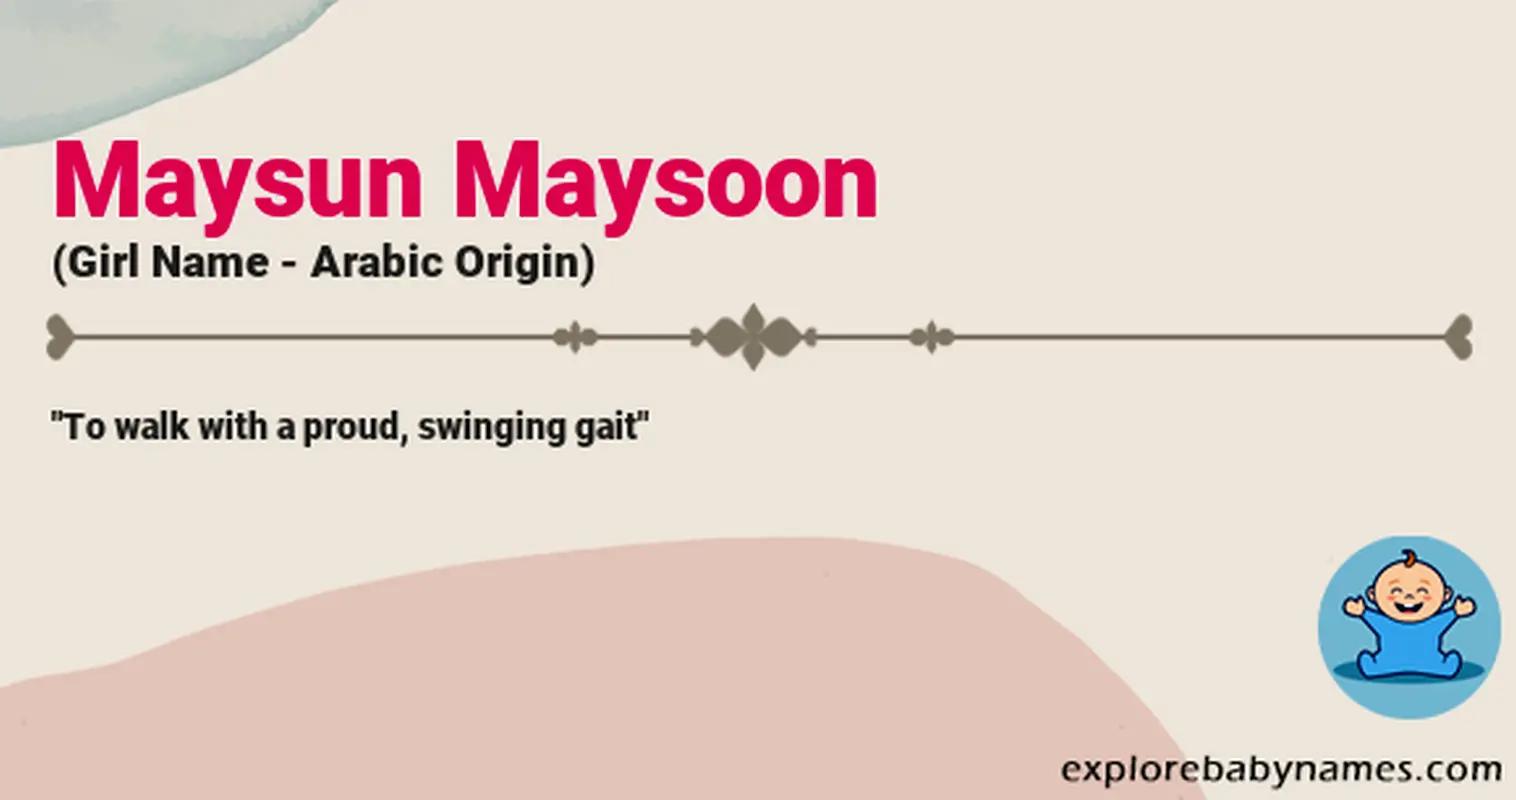 Meaning of Maysun Maysoon